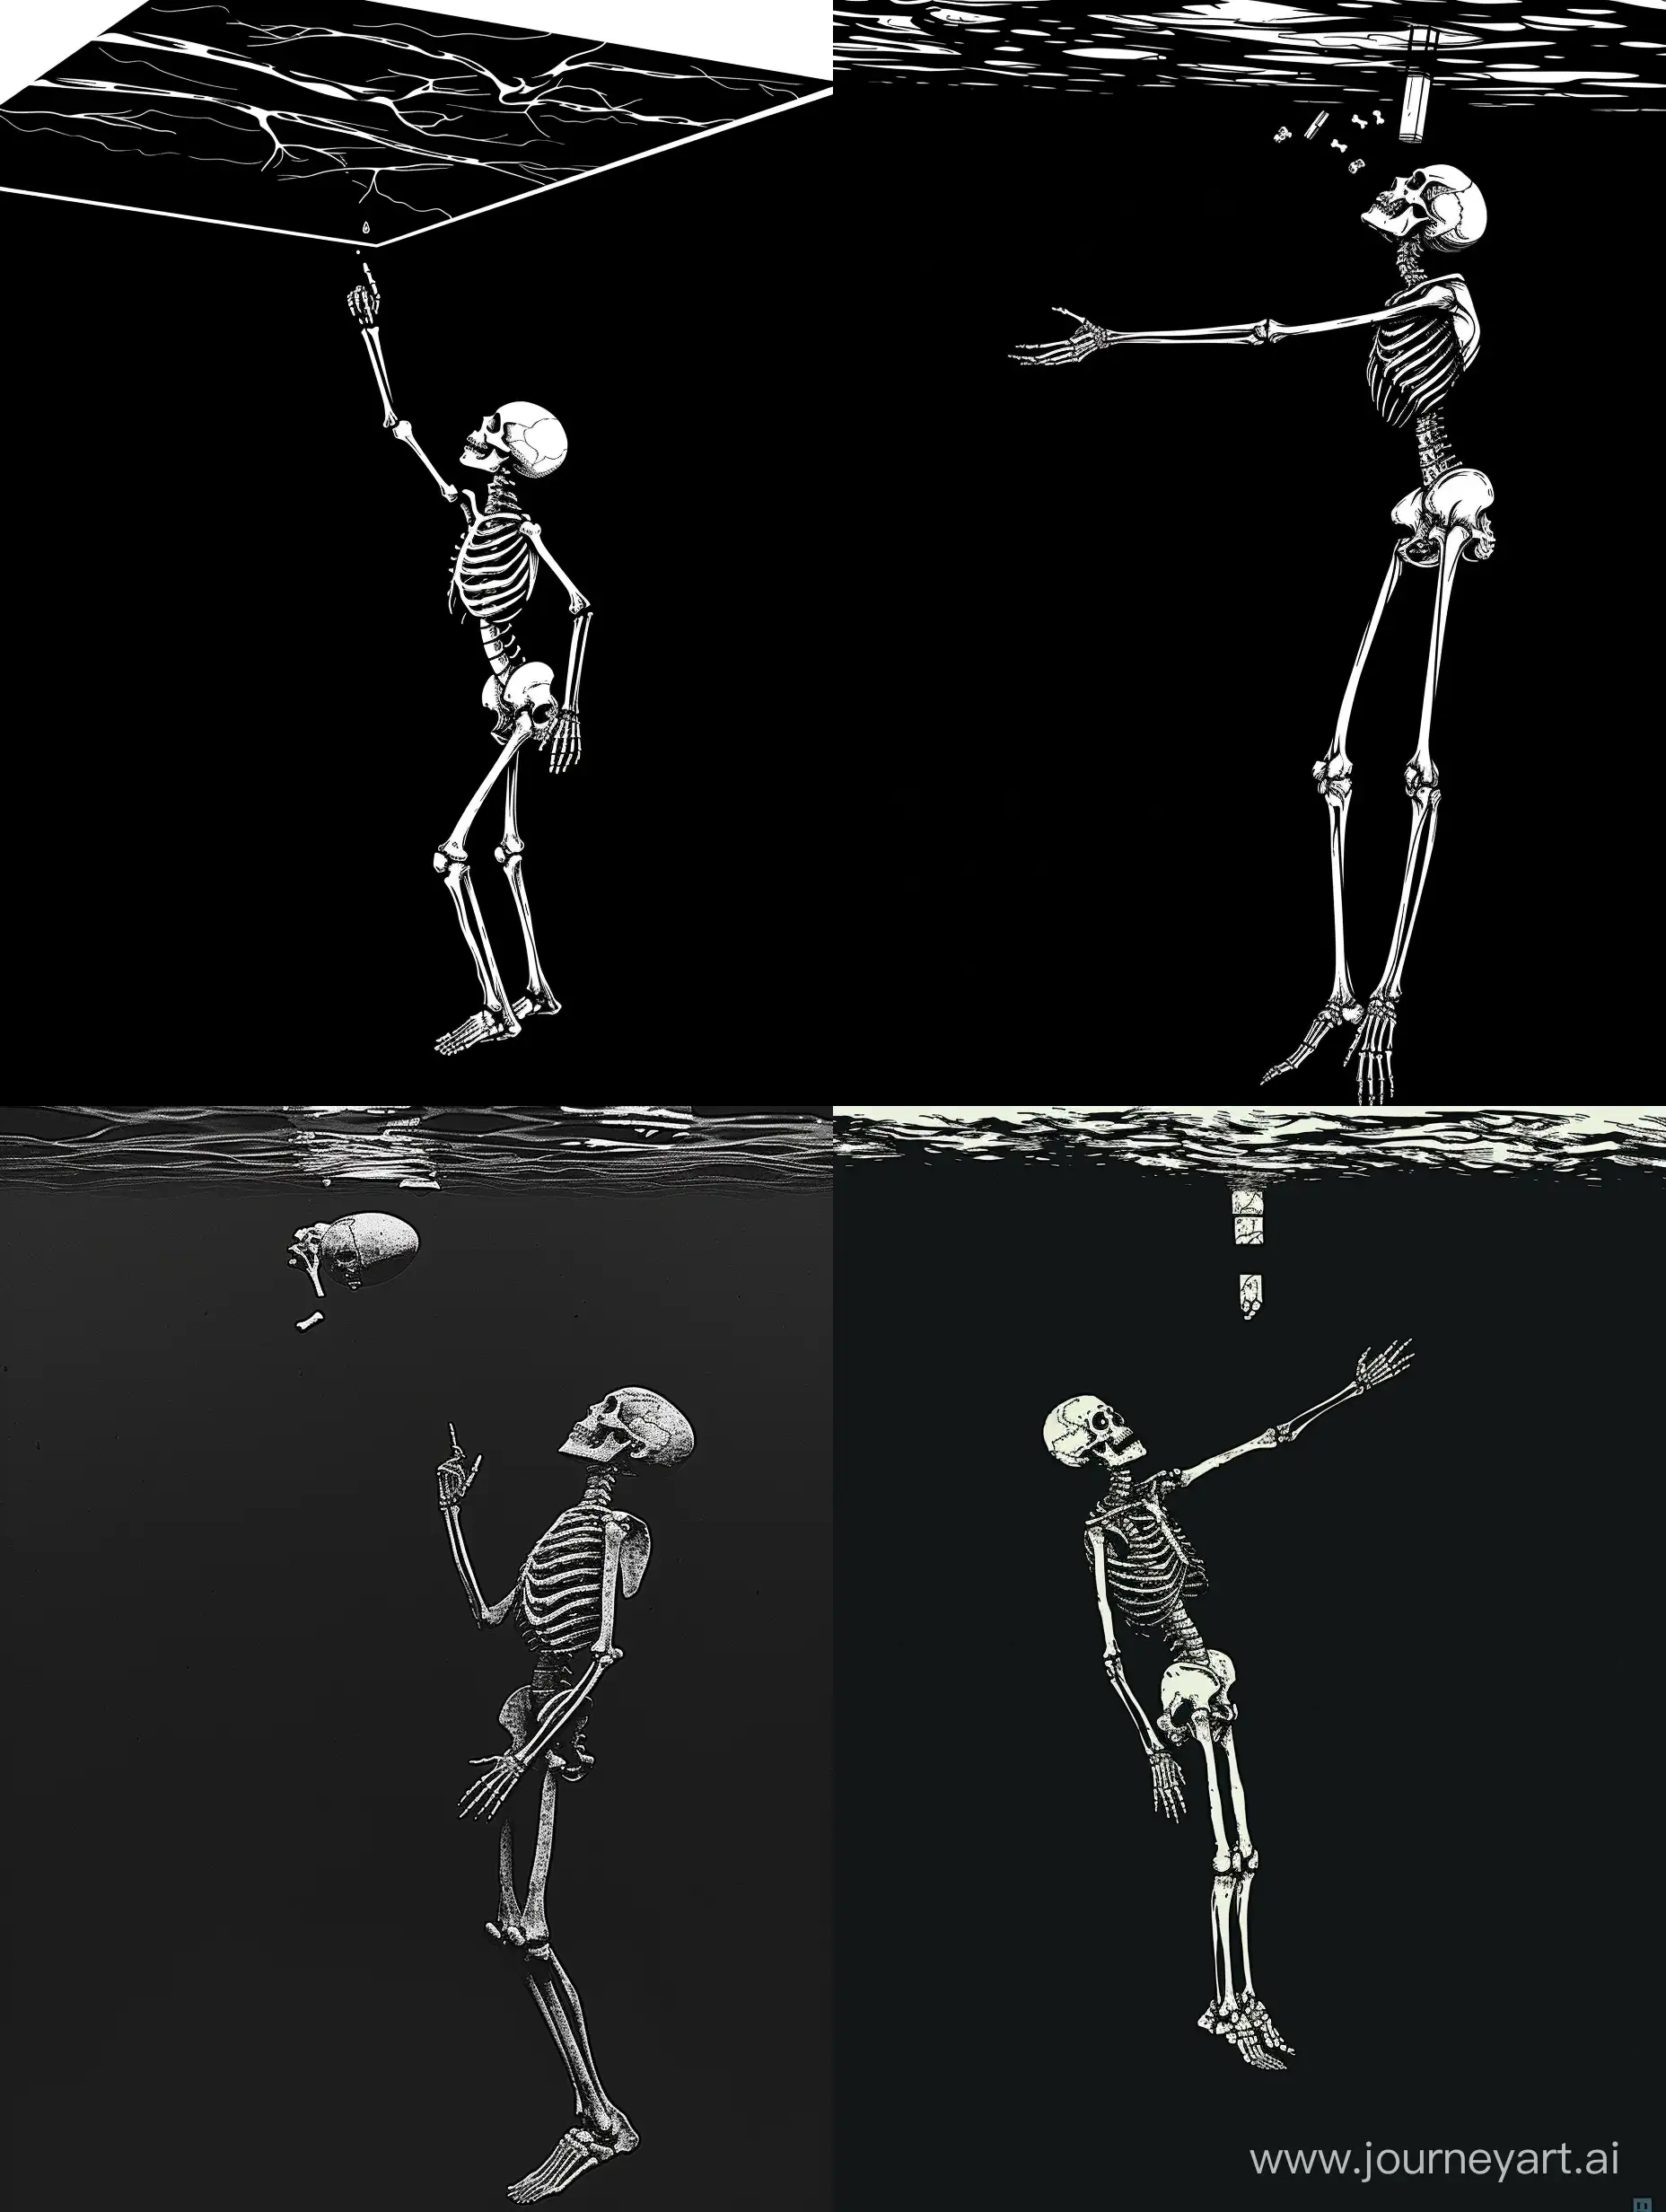 logo, minimalistic, deadman in full length who located in the corner on the ceiling, sad, looks at the object from below and extends his index finger towards it, looks down, bones, skeleton, black background